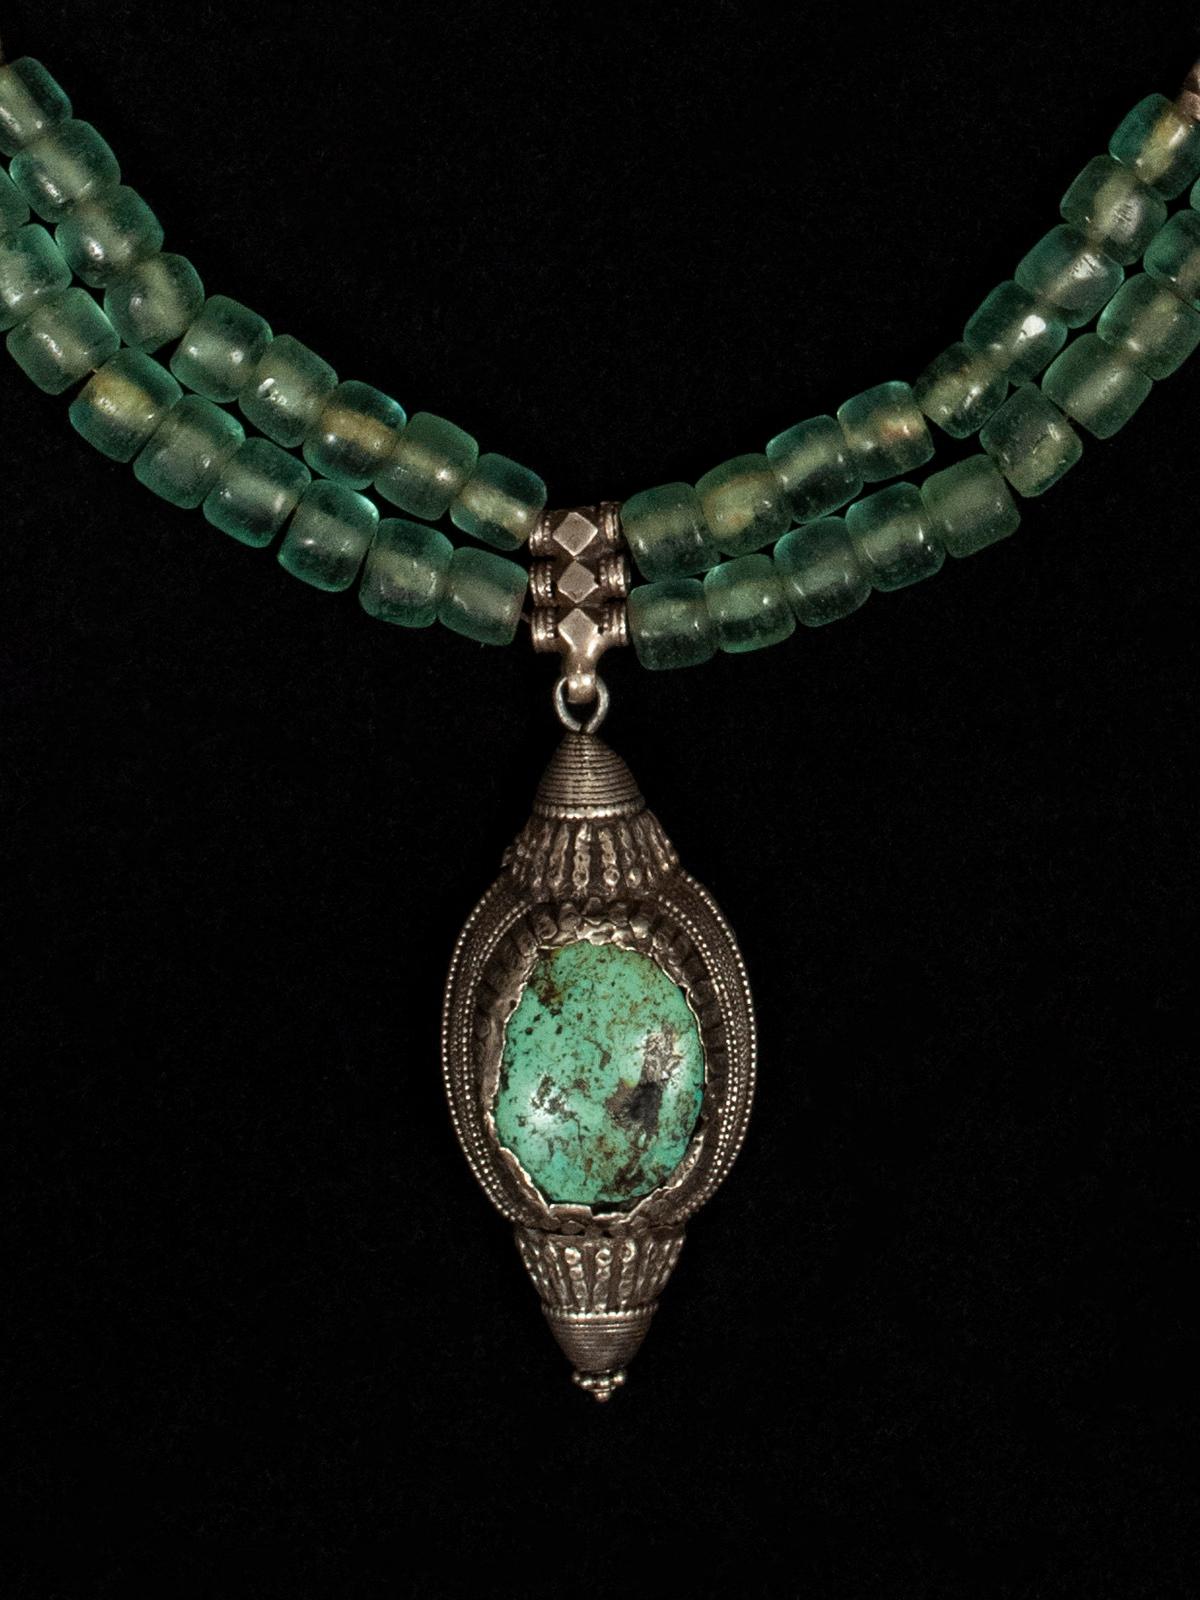 Hand-Crafted Antique Tibetan Turquoise and Silver Bead Pendant Contemporary Necklace